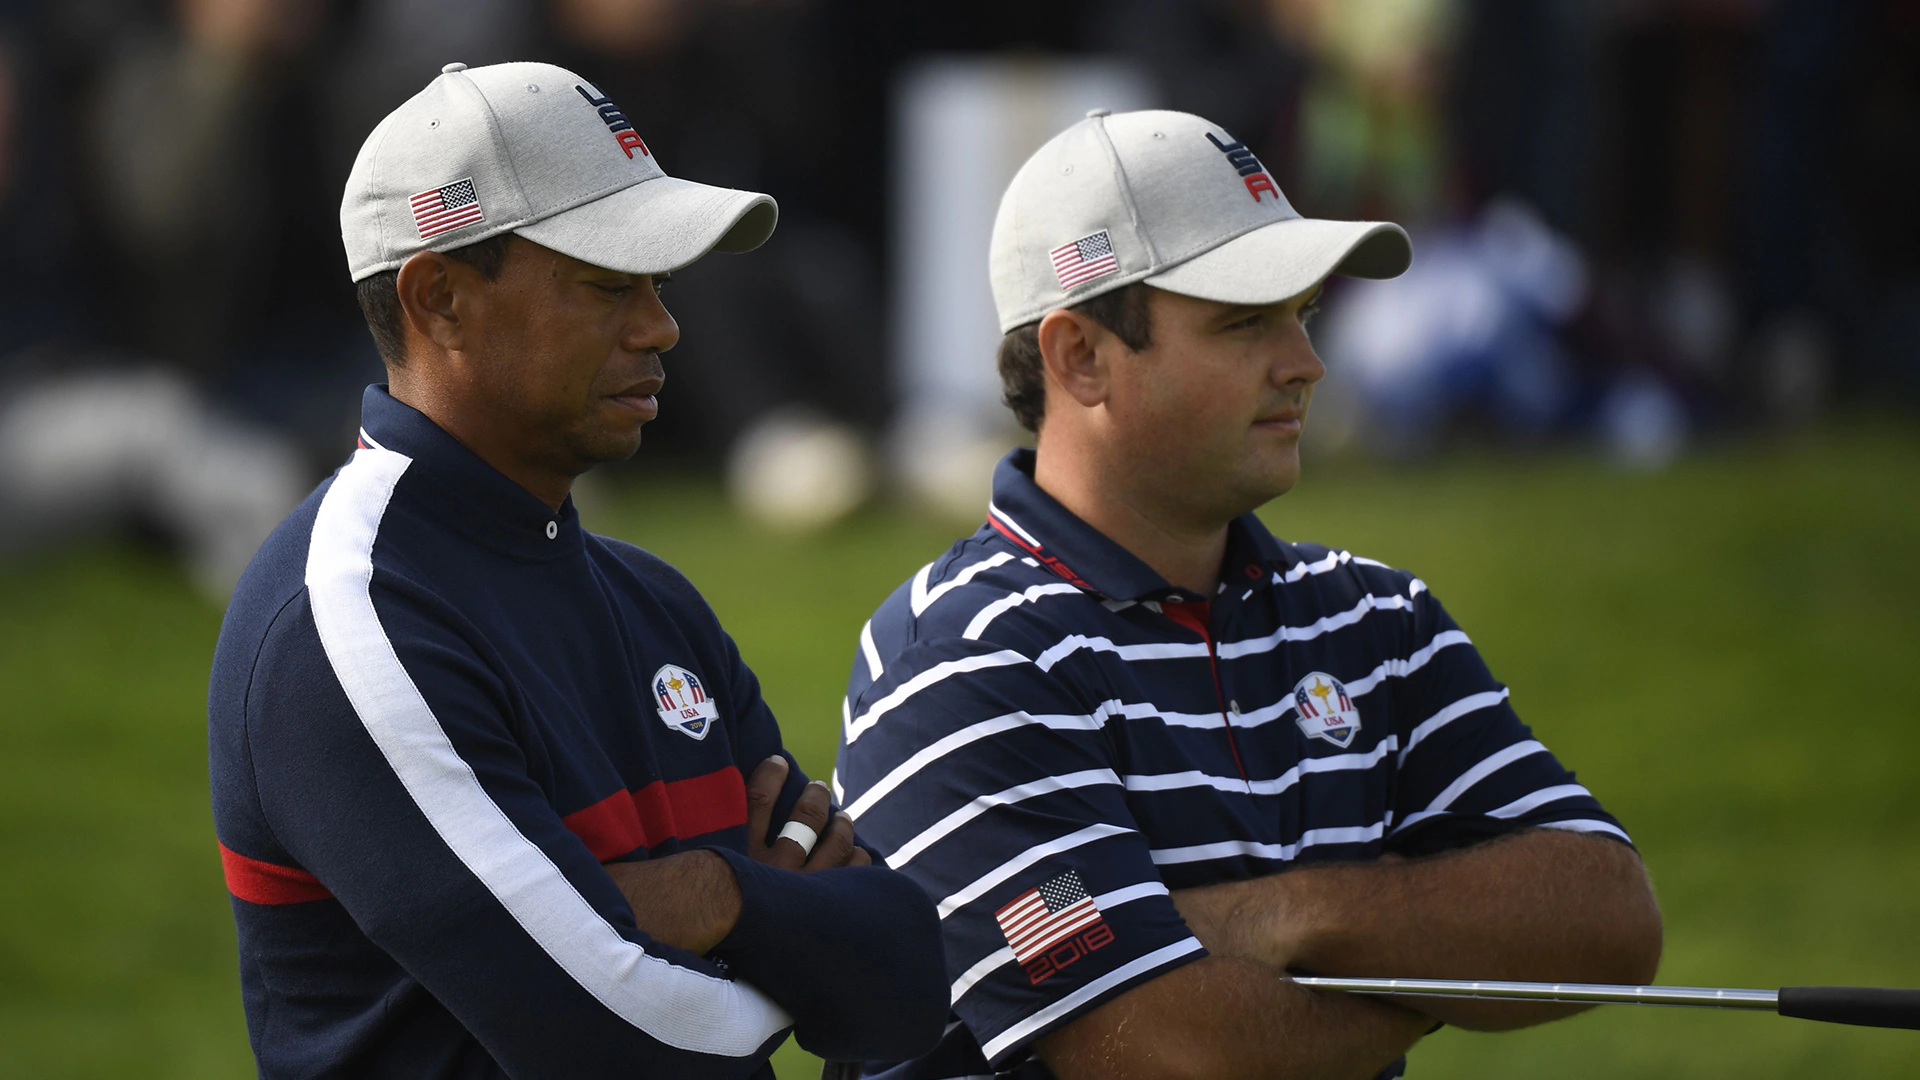 Furyk: Reed, Tiger knew 'weeks in advance' they'd partner